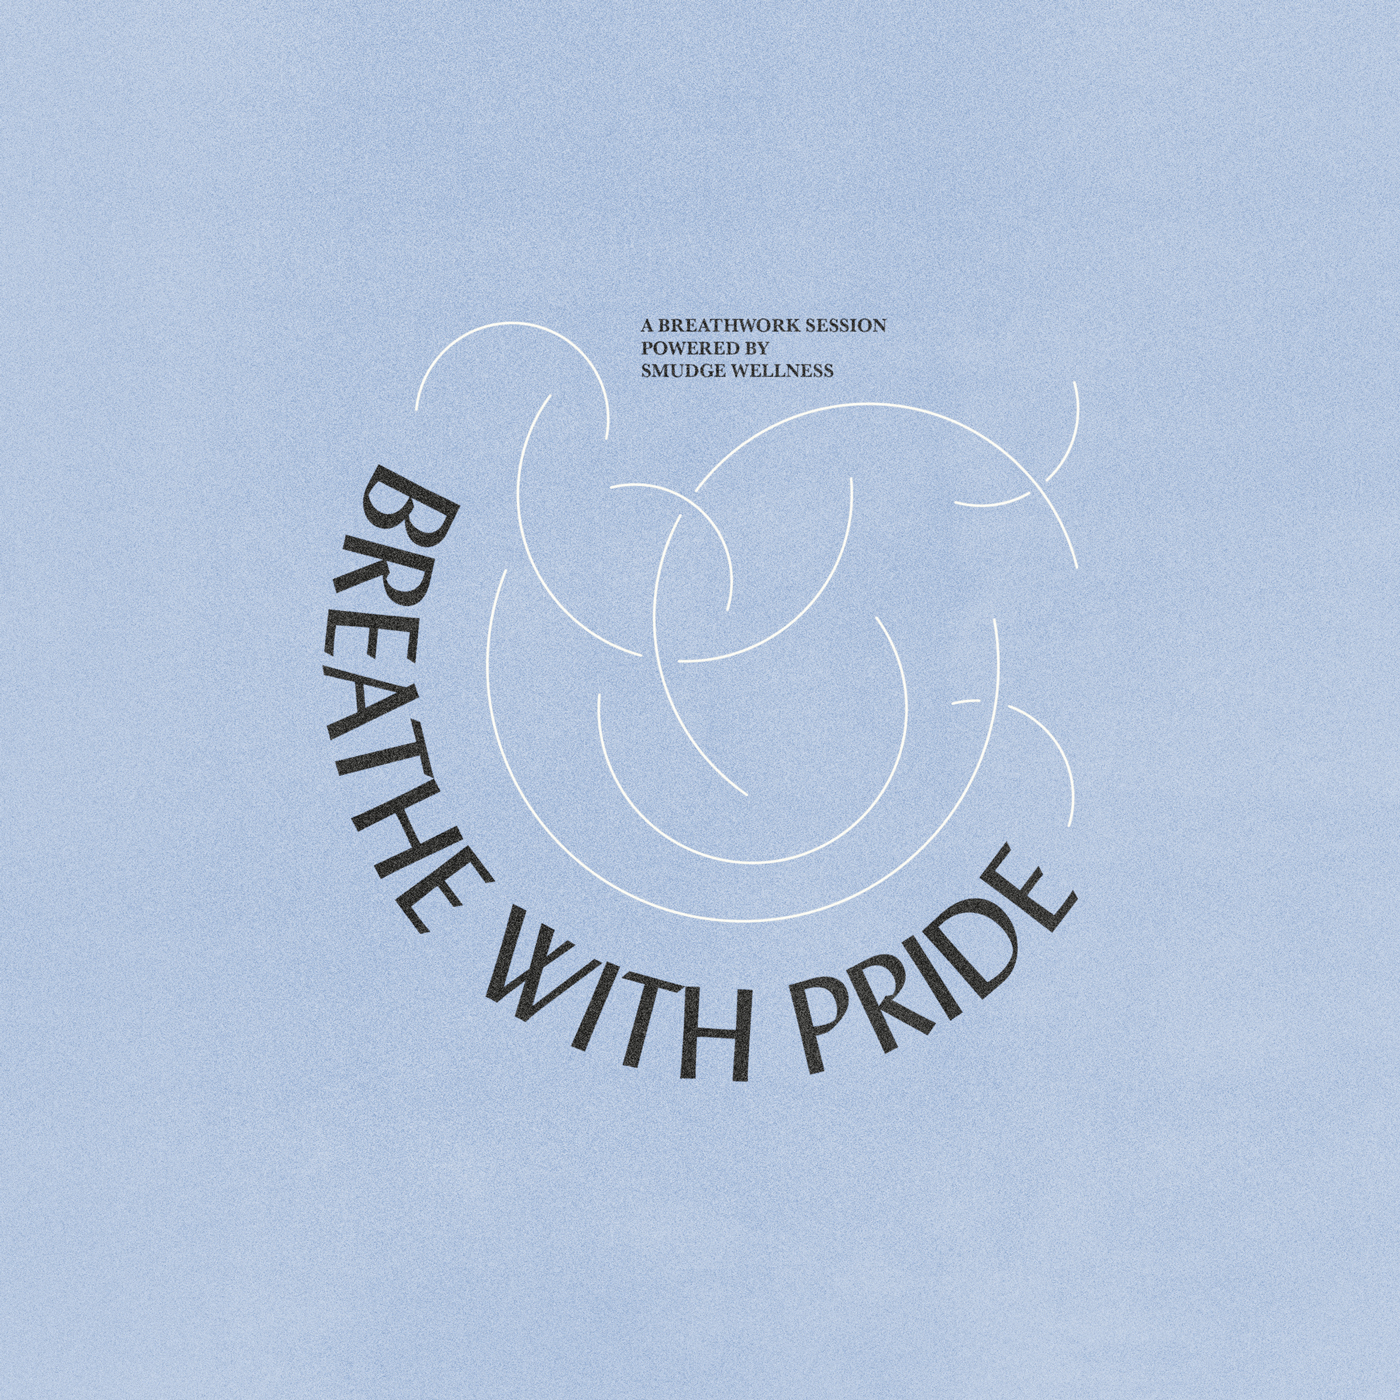 "BREATHE WITH PRIDE" with their logo sketched on a blue surface.